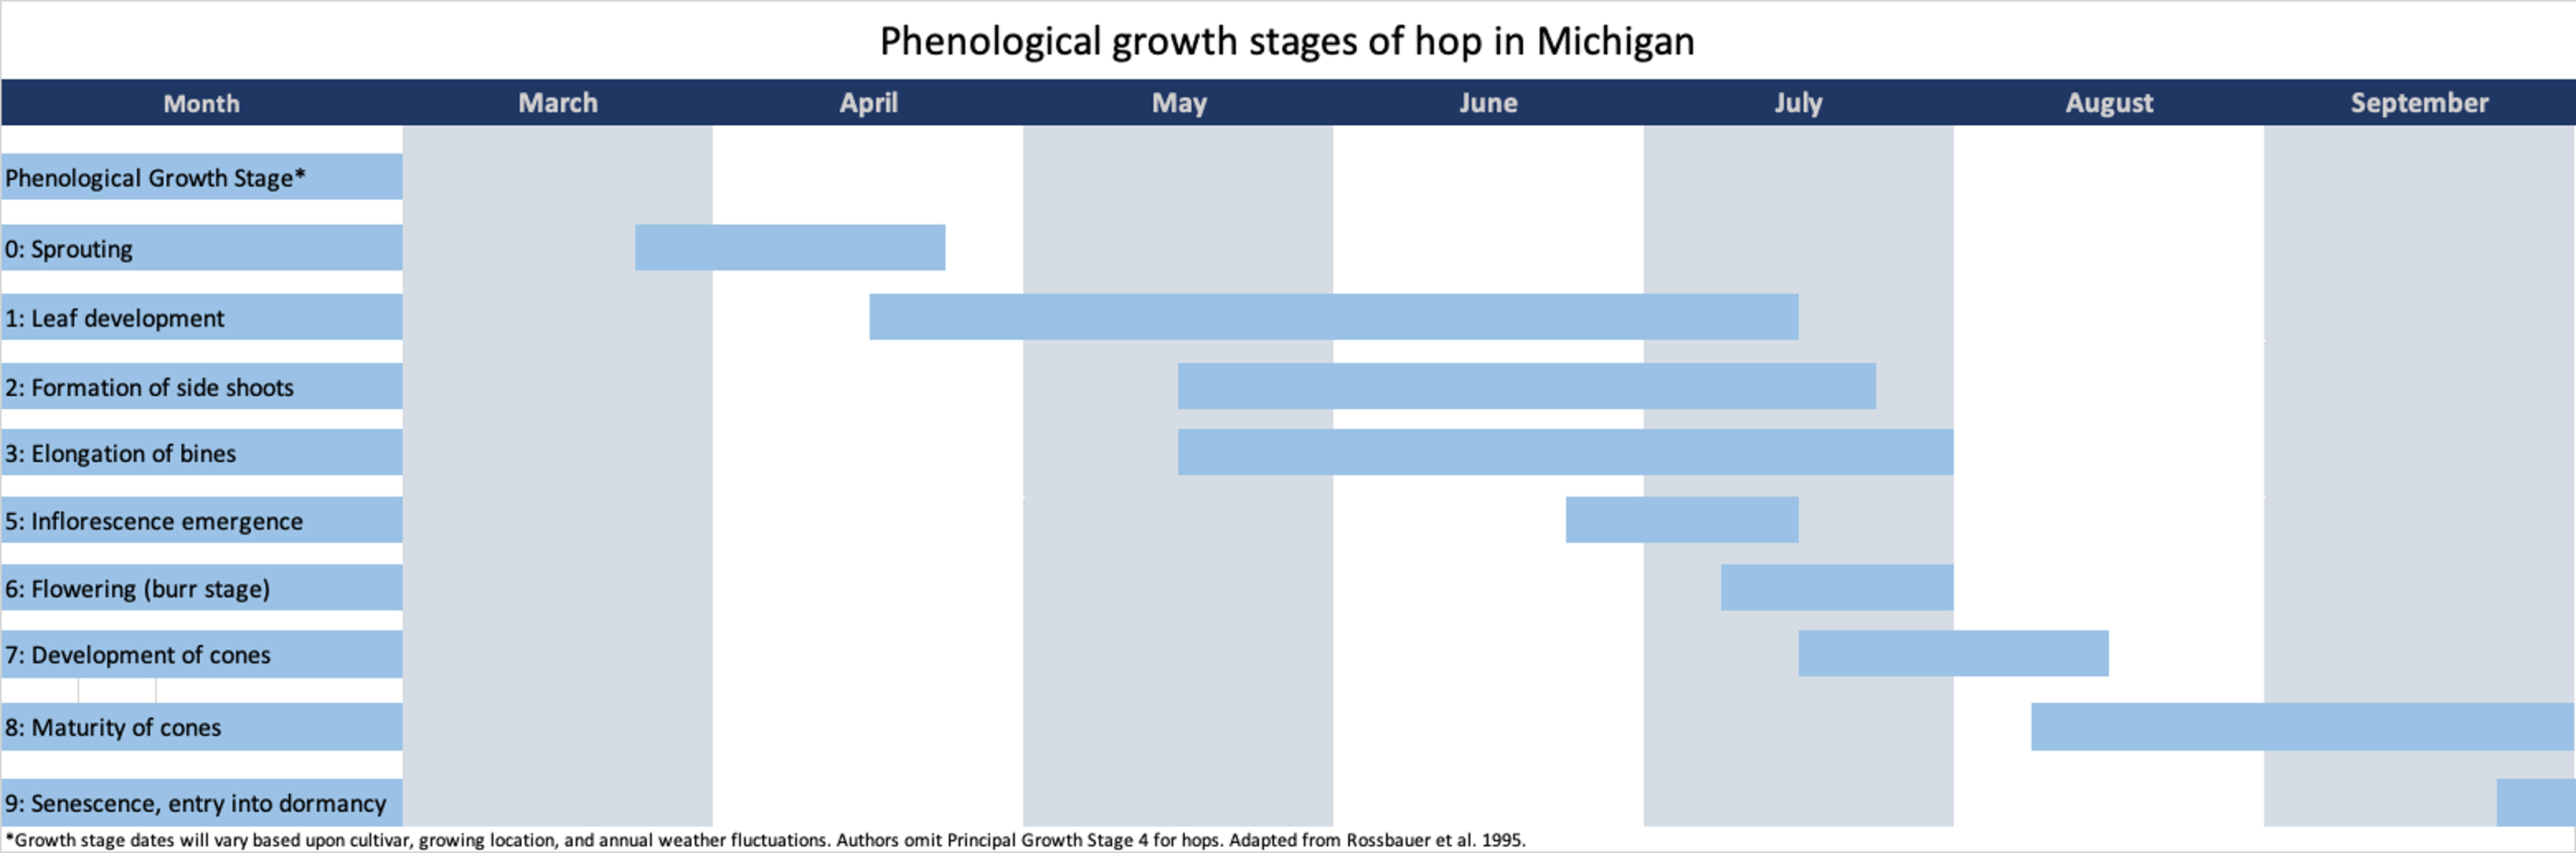 Phenological growth stages of hop in MI.jpg